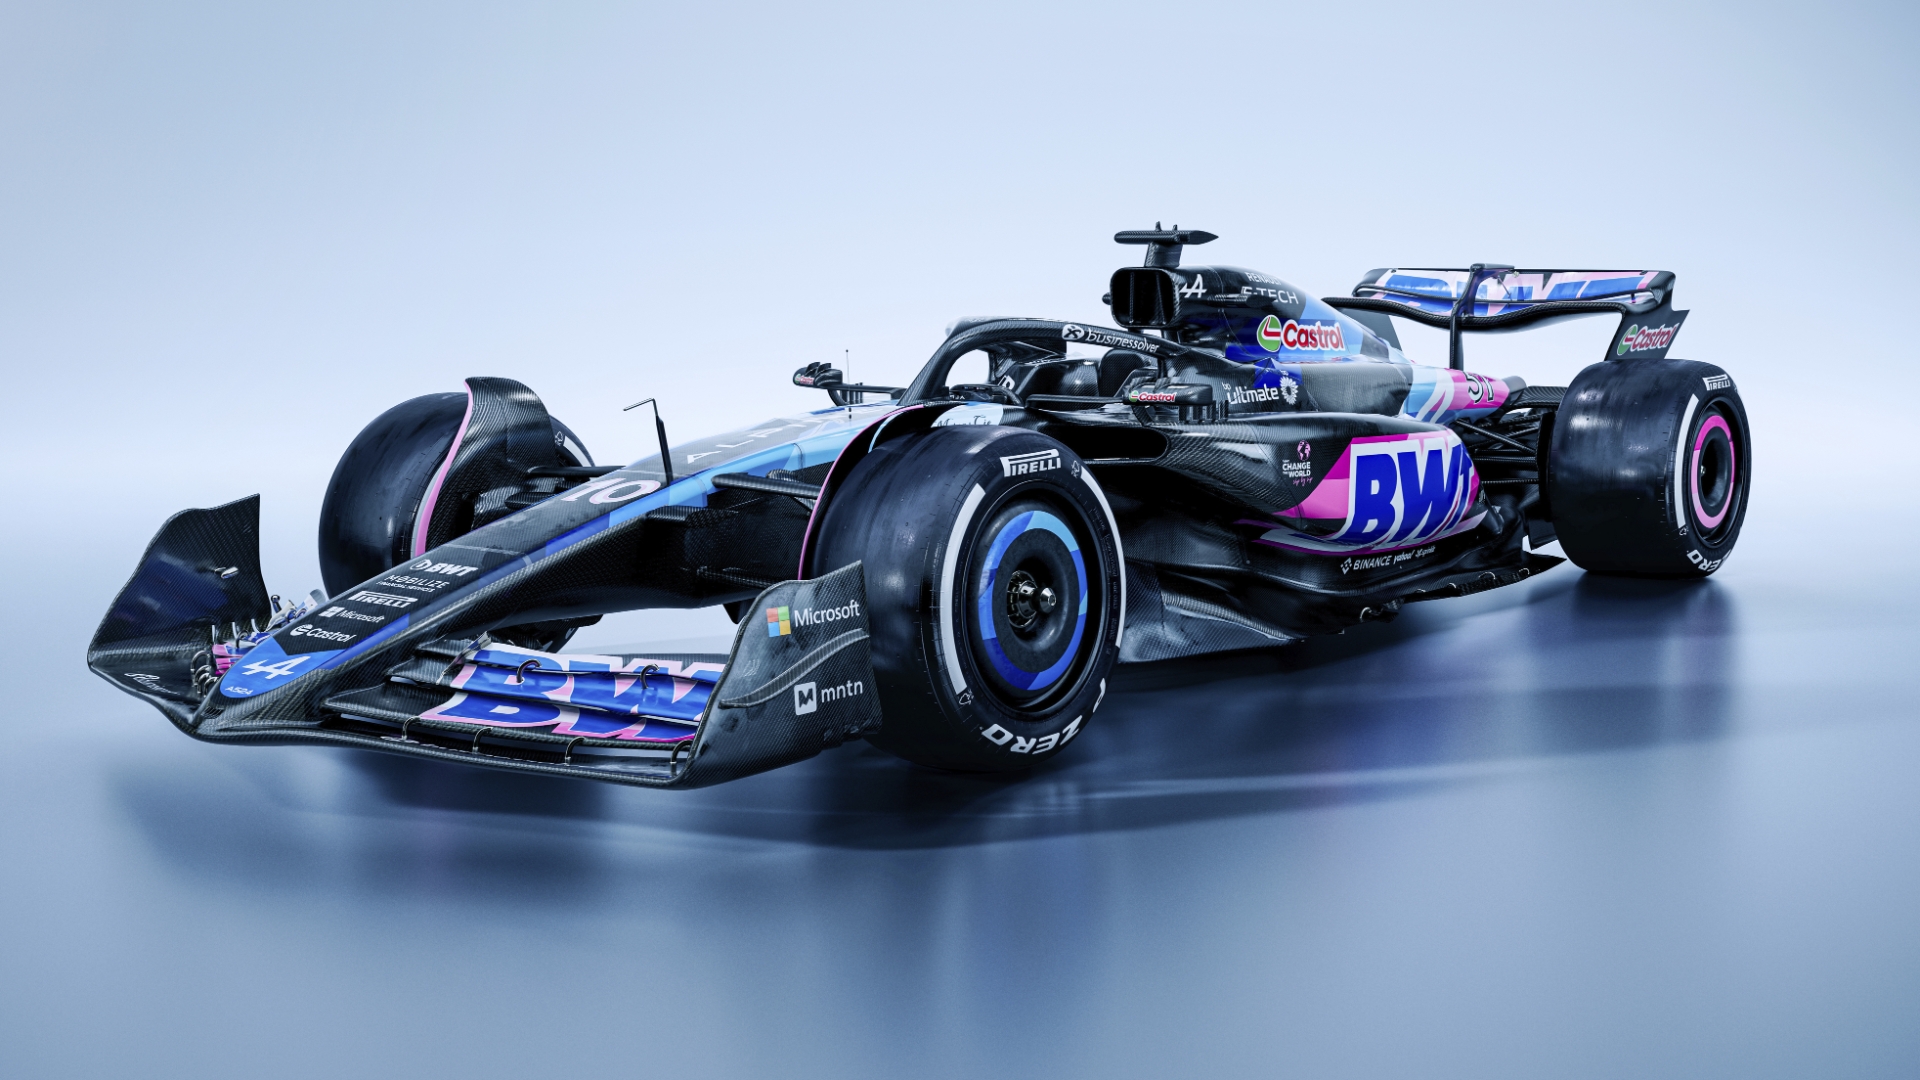 Alpine unveils the A524 livery for upcoming season